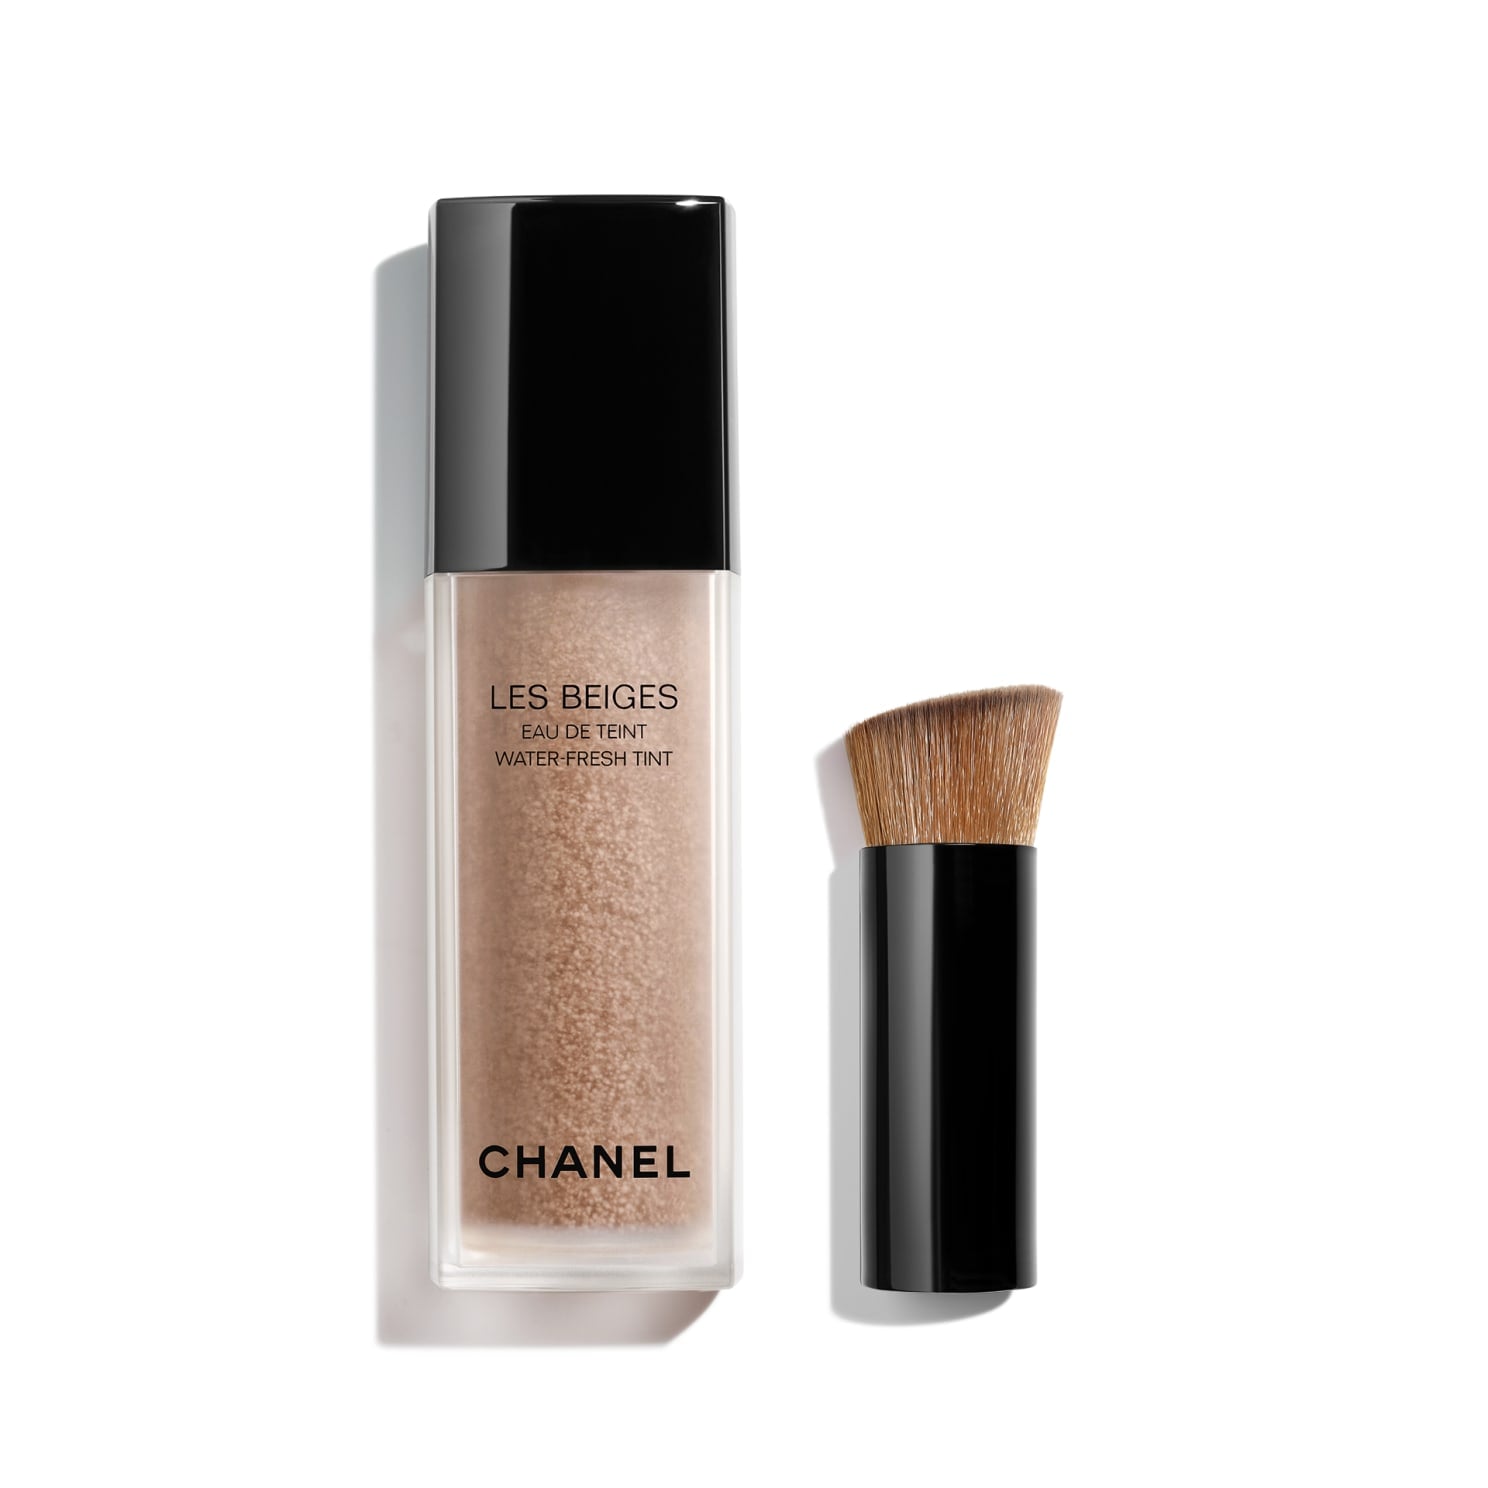 CHANEL LES BEIGES WATER FRESH TINT REVIEW, best way to wear it